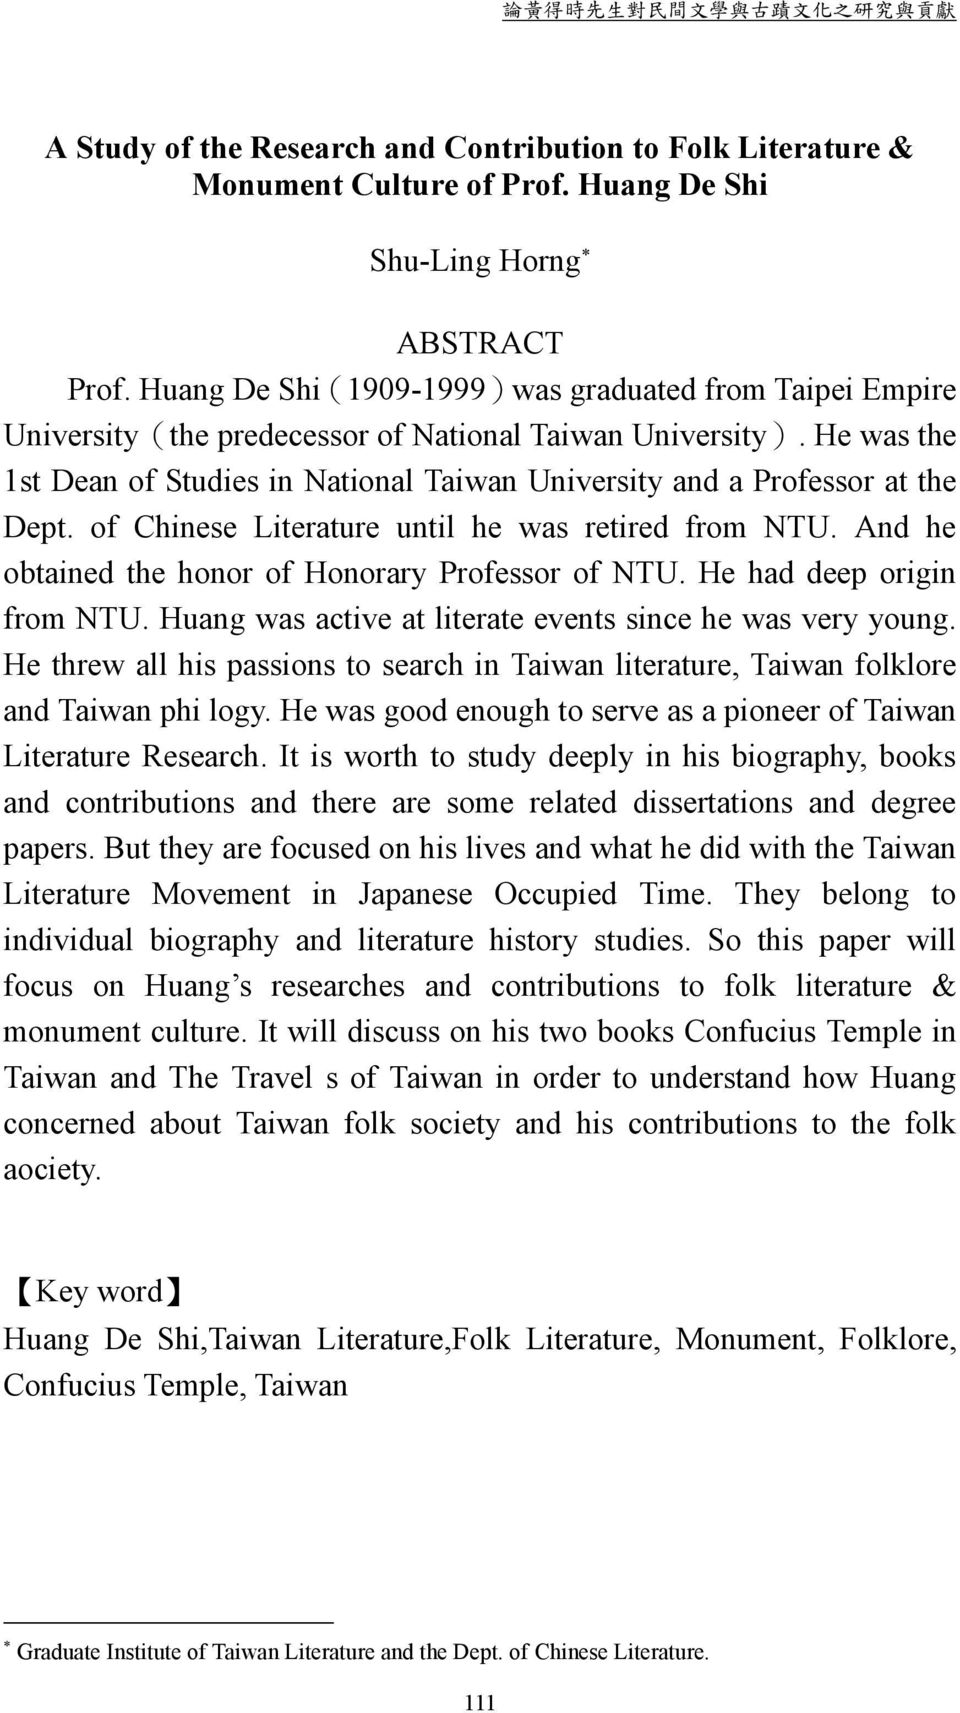 He was the 1st Dean of Studies in National Taiwan University and a Professor at the Dept. of Chinese Literature until he was retired from NTU. And he obtained the honor of Honorary Professor of NTU.